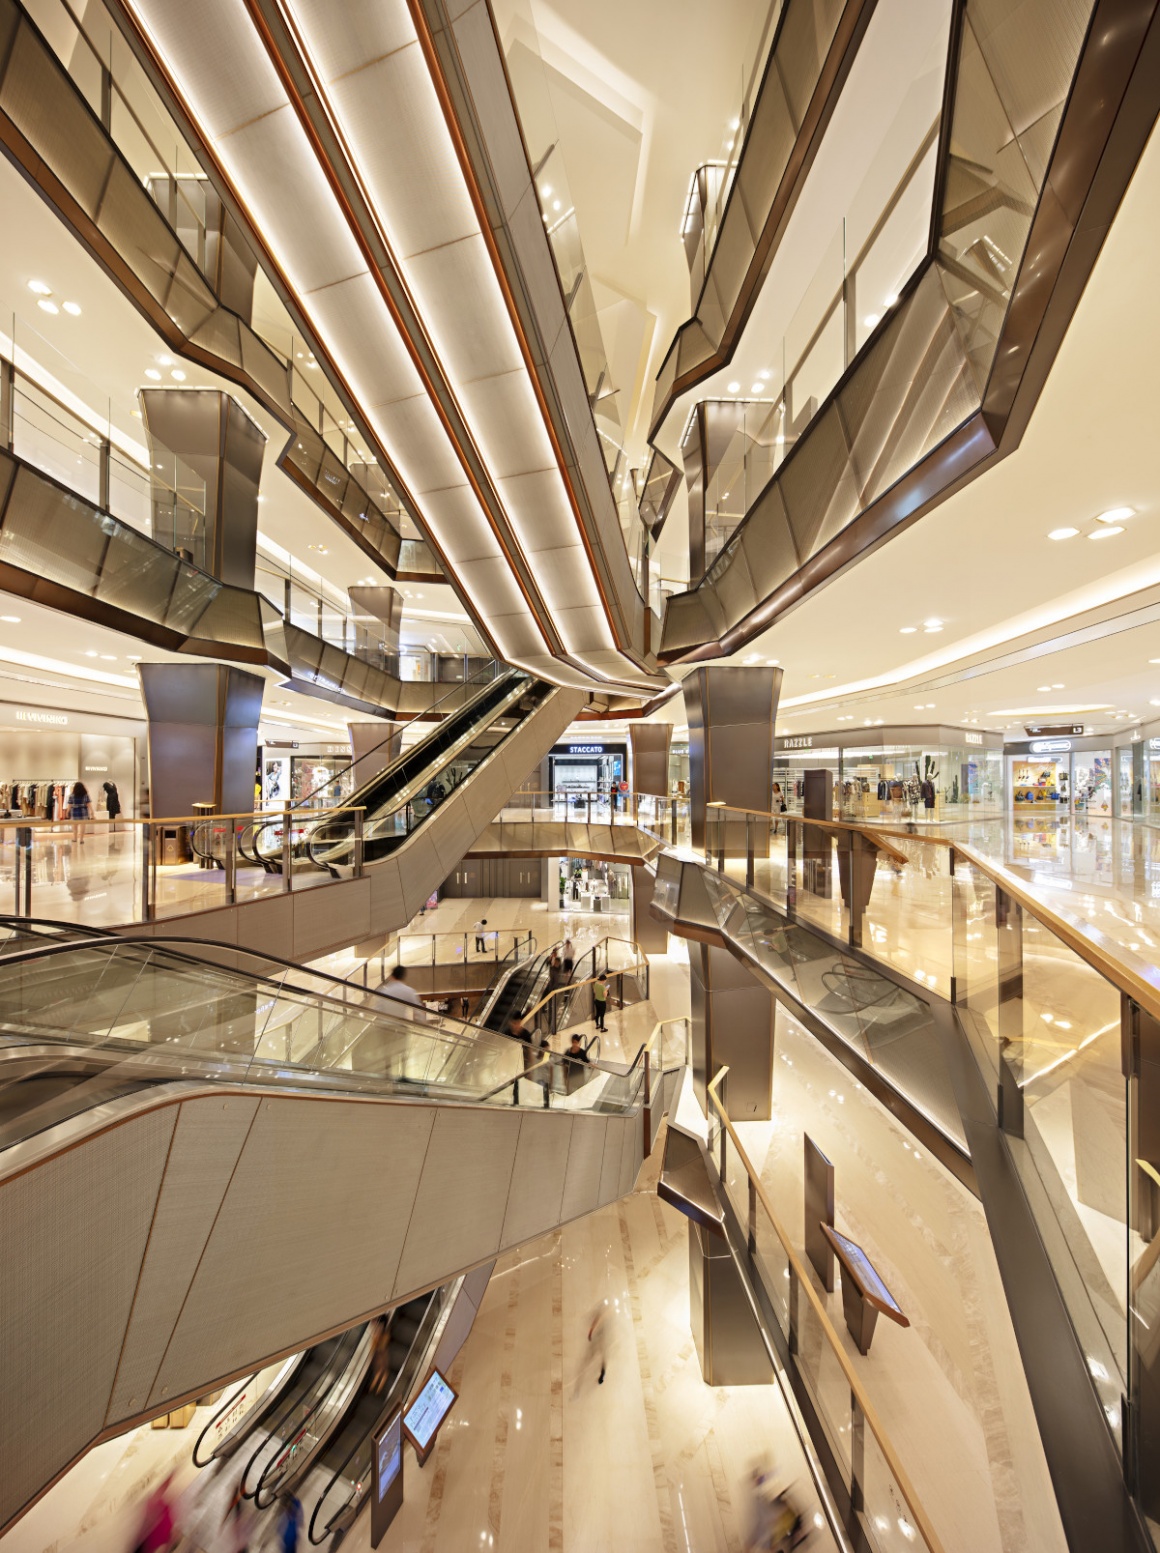 The interior of a shopping center with modern design and escalators...